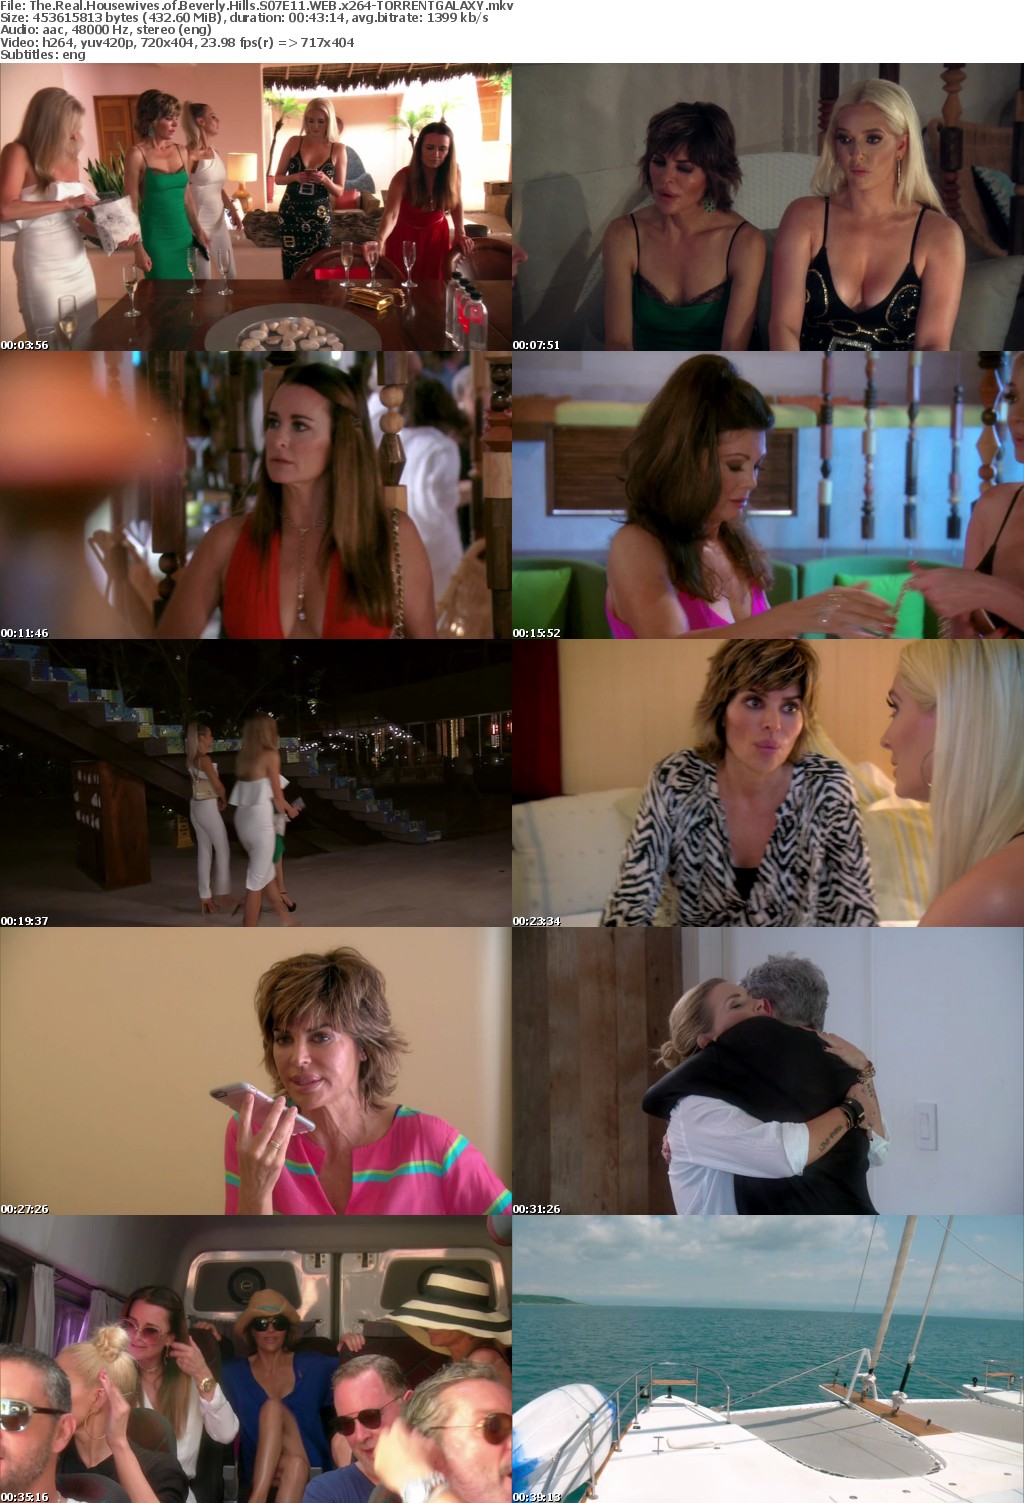 The Real Housewives of Beverly Hills S07E11 WEB x264-GALAXY